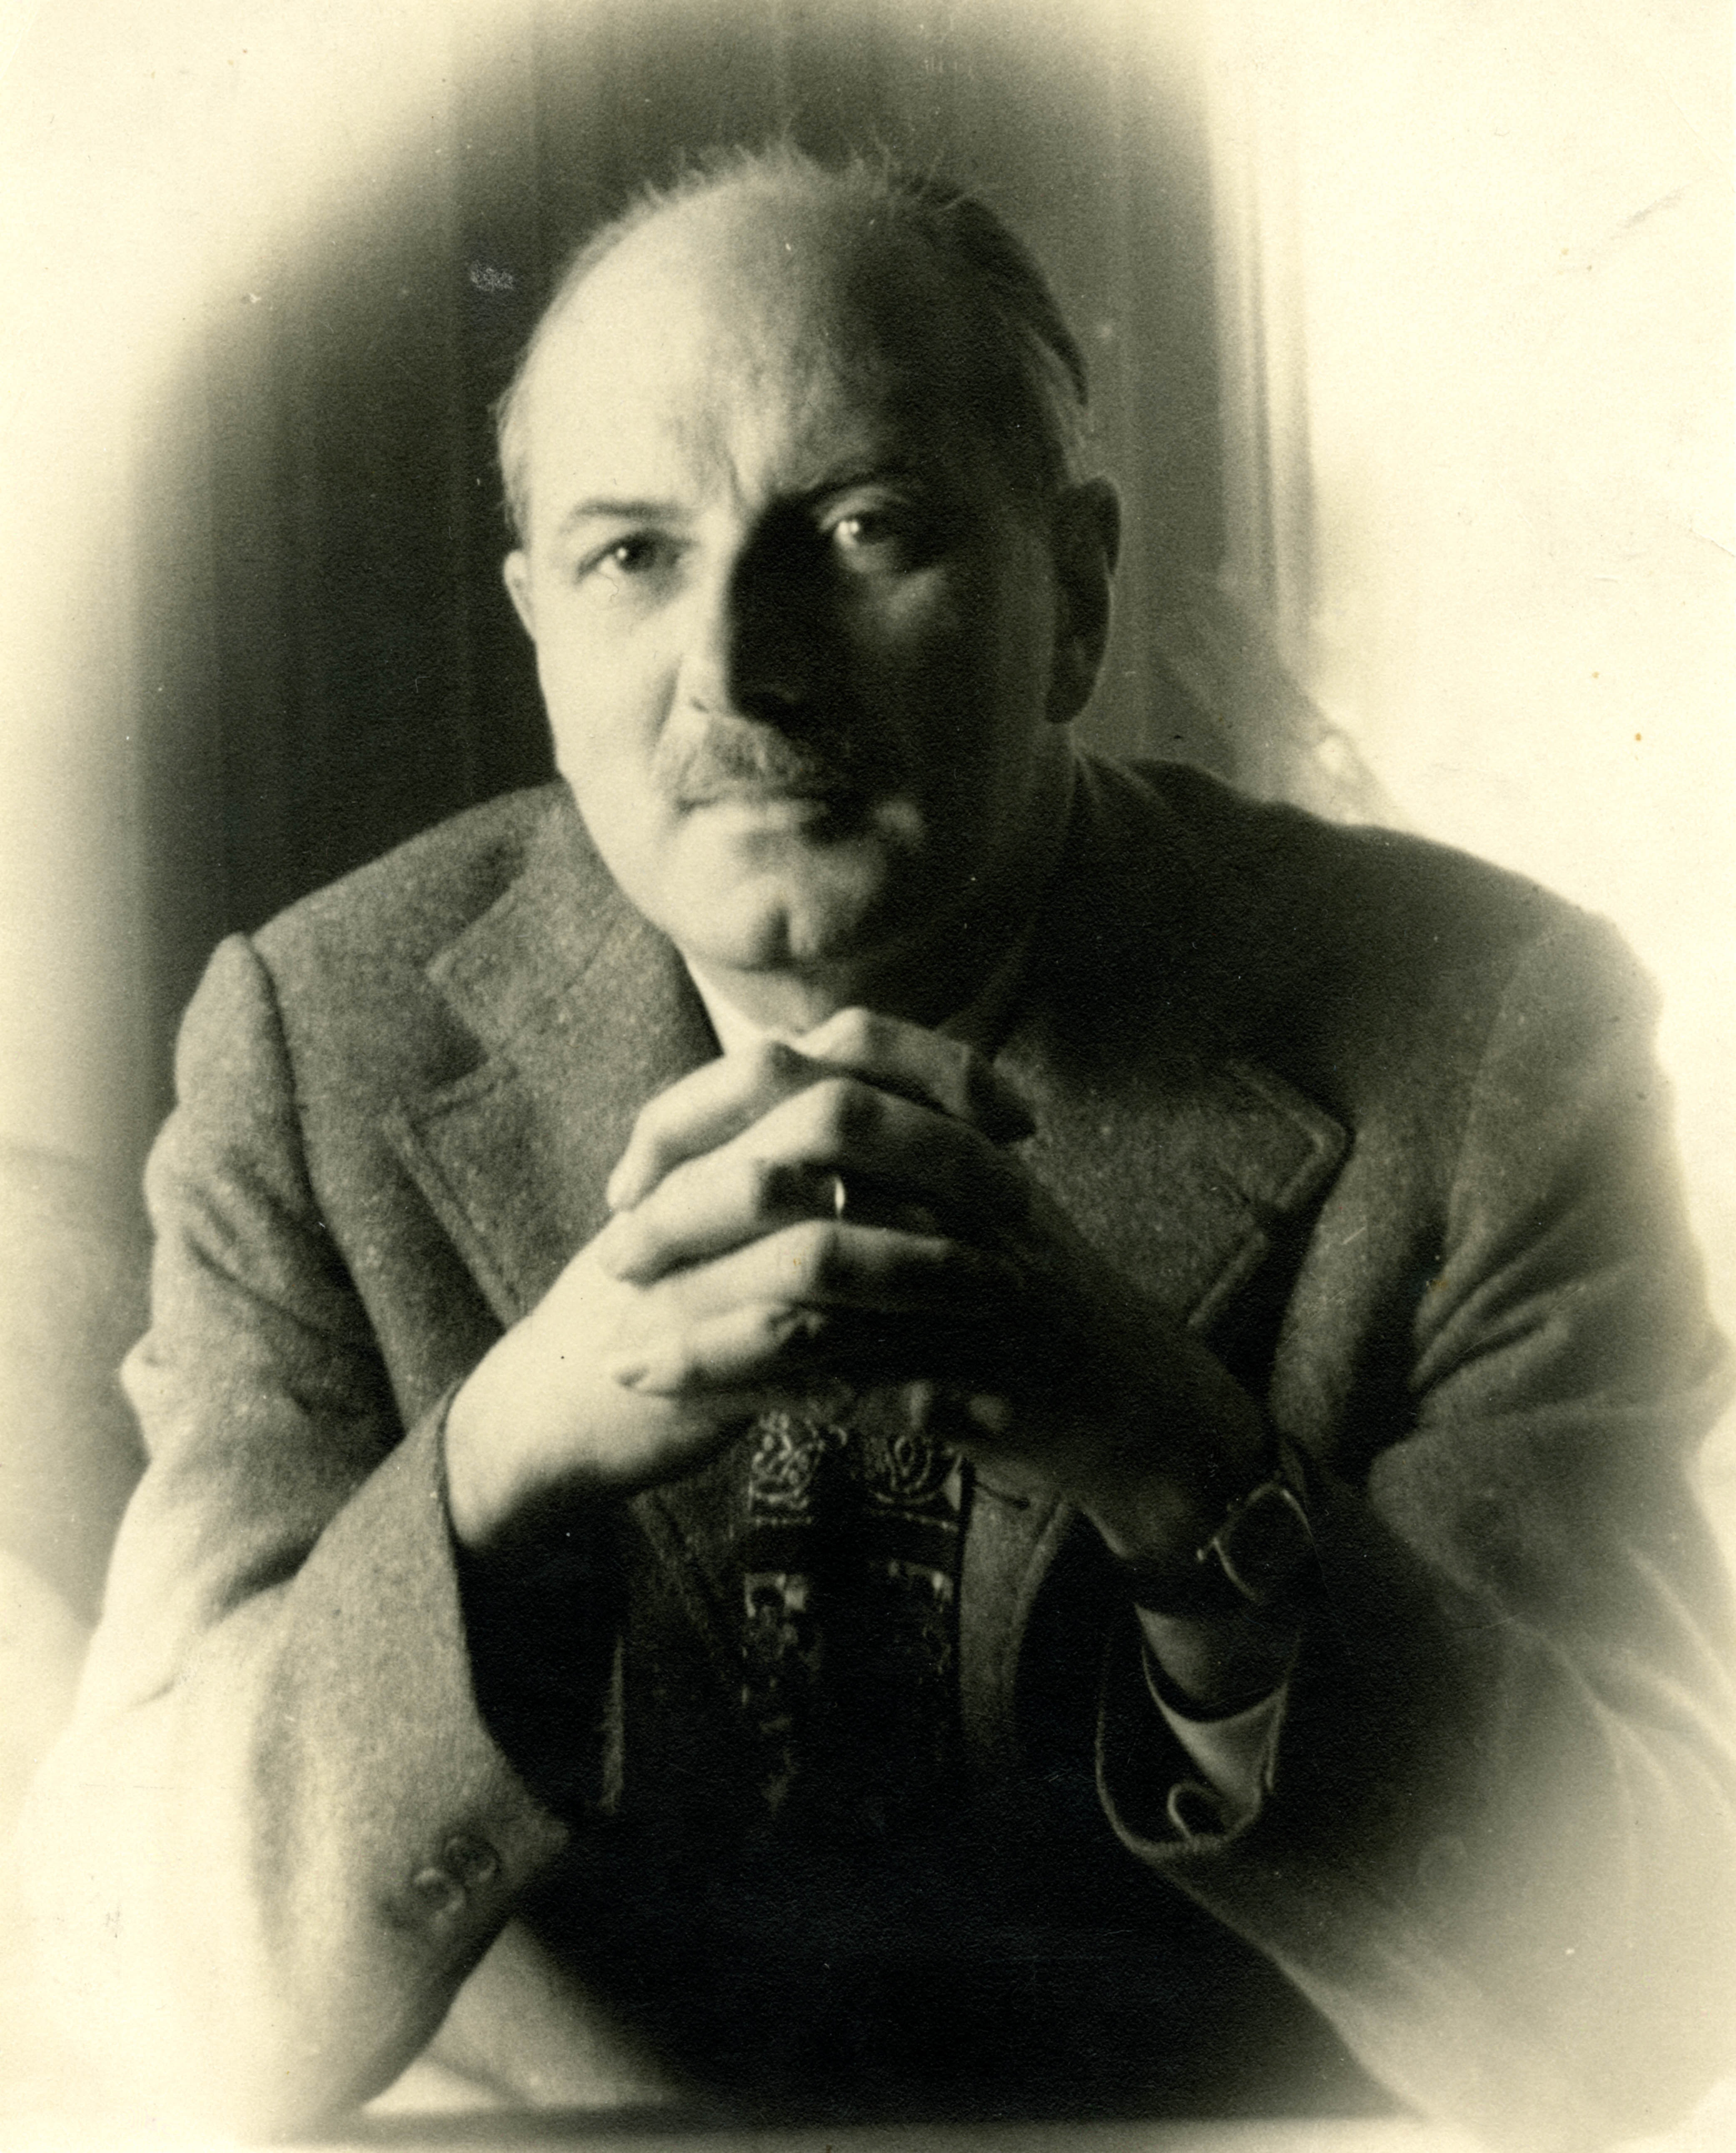 Photograph of Lewis Mumford, 1938 (Ms. Coll. 2)